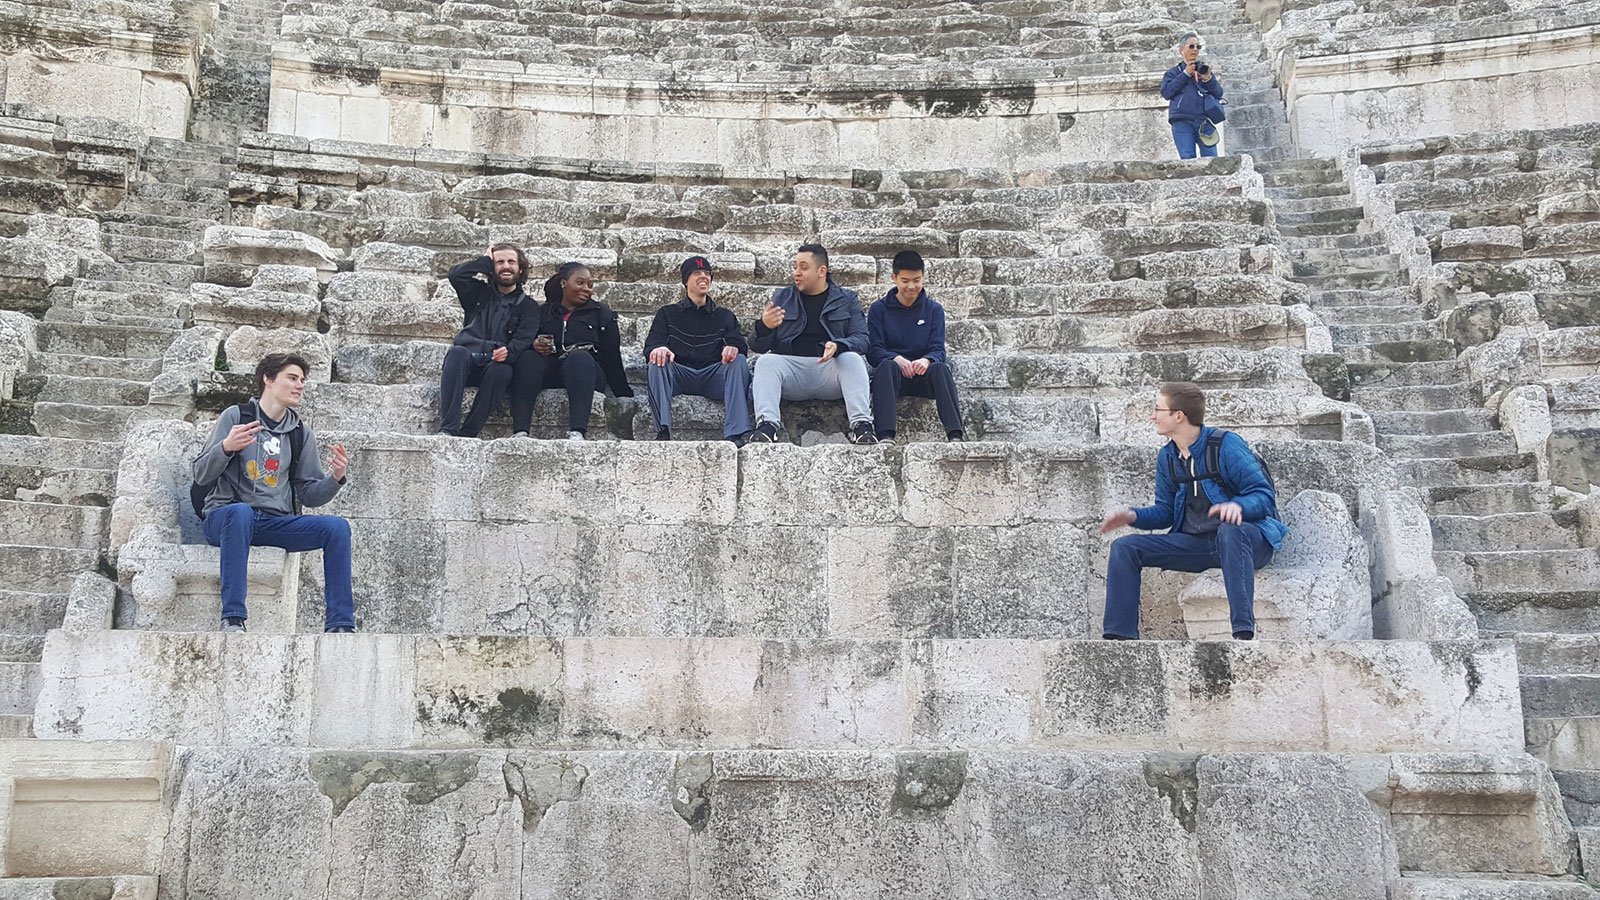 Group of students traveling abroad sitting on some ancient stone steps.